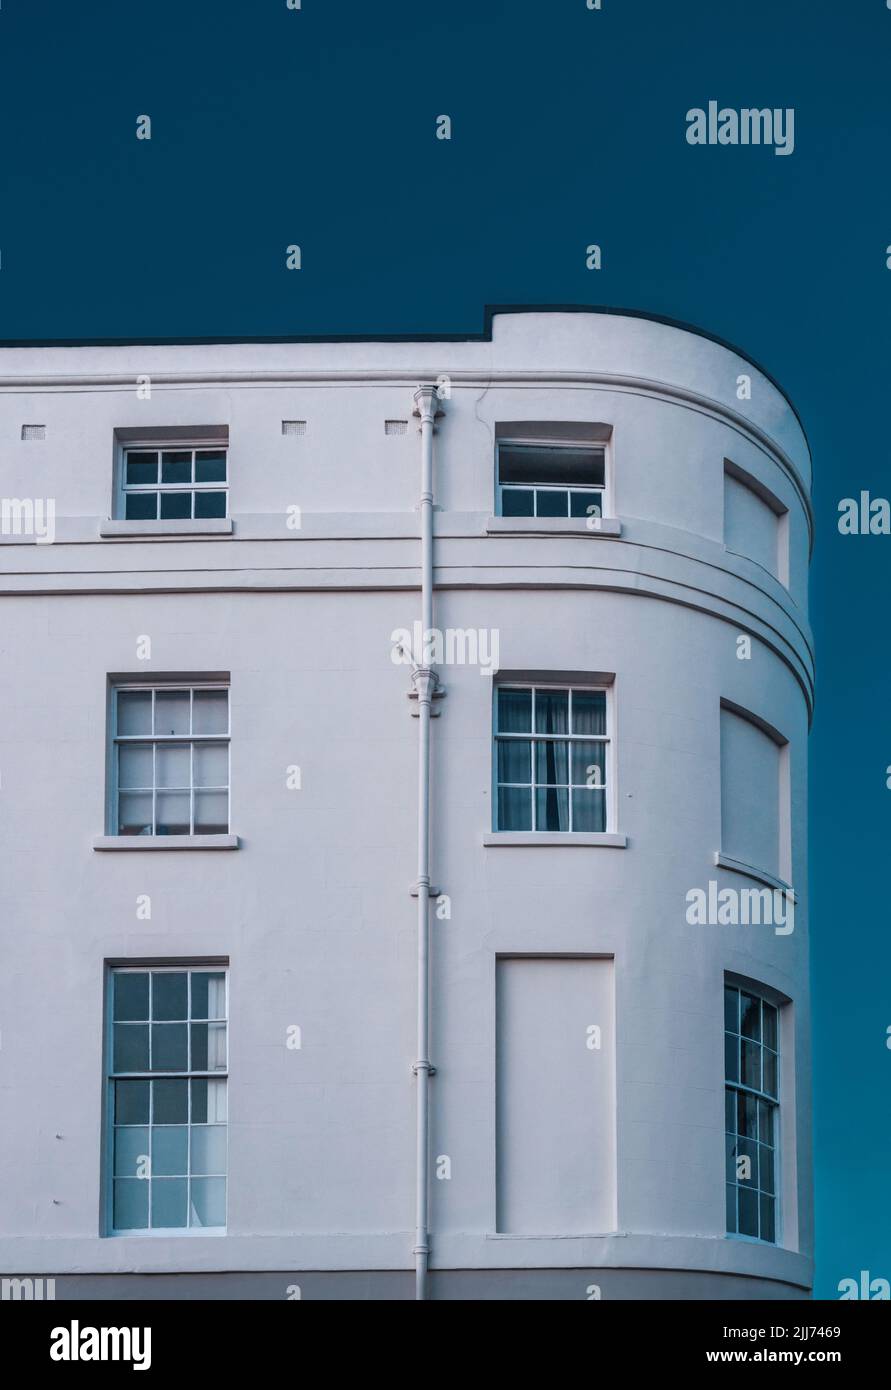 19th century late Georgian architecture residential British building with white facade along Portland Terrace in Southampton, Hampshire, England, UK Stock Photo